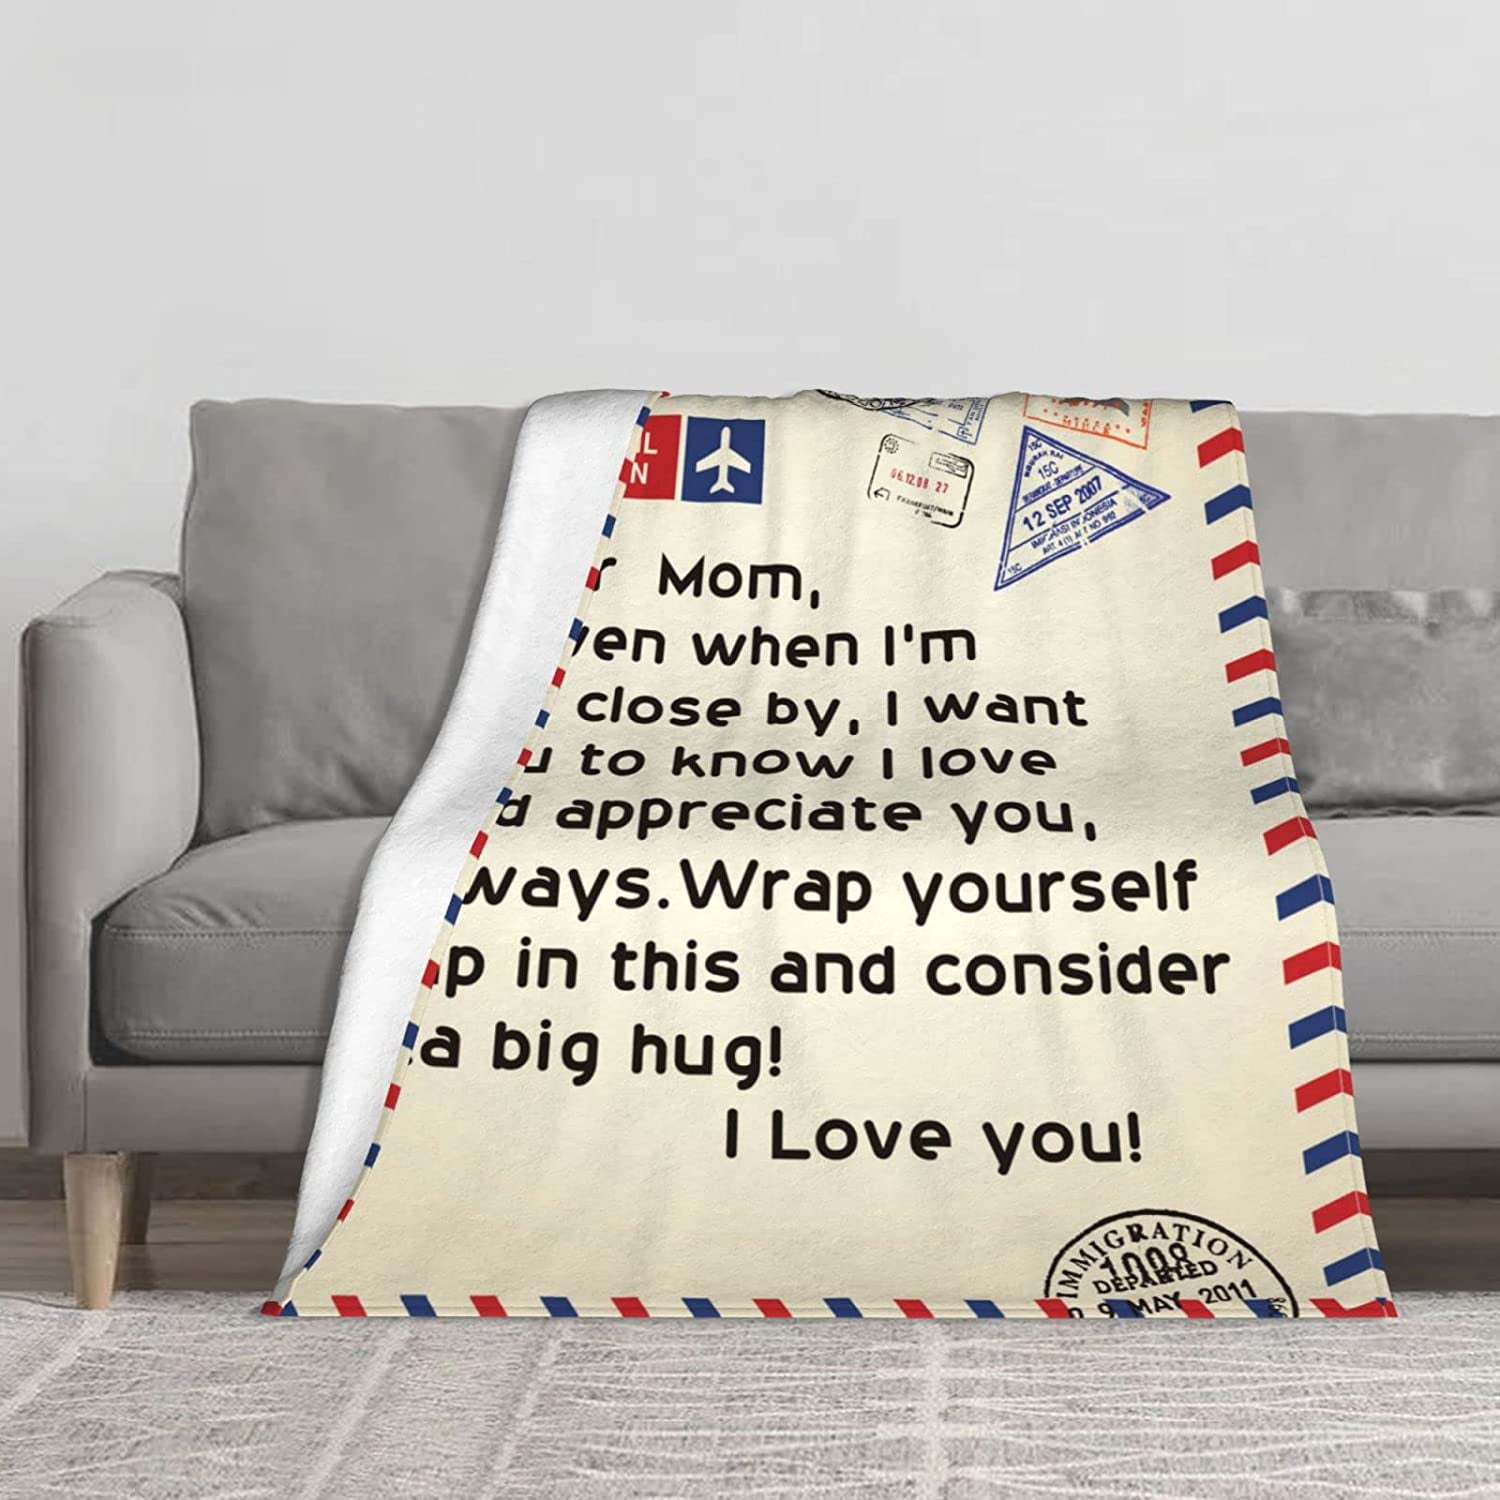  to My Mom Customized Blanket, Letter Airmail Fleece Blanket for  Mom, Throw Blanket, Personalized Gifts for Mom from Daughter or Son, Mom  Gift for Christmas Mother's Day, Mom Birthday Gifts 